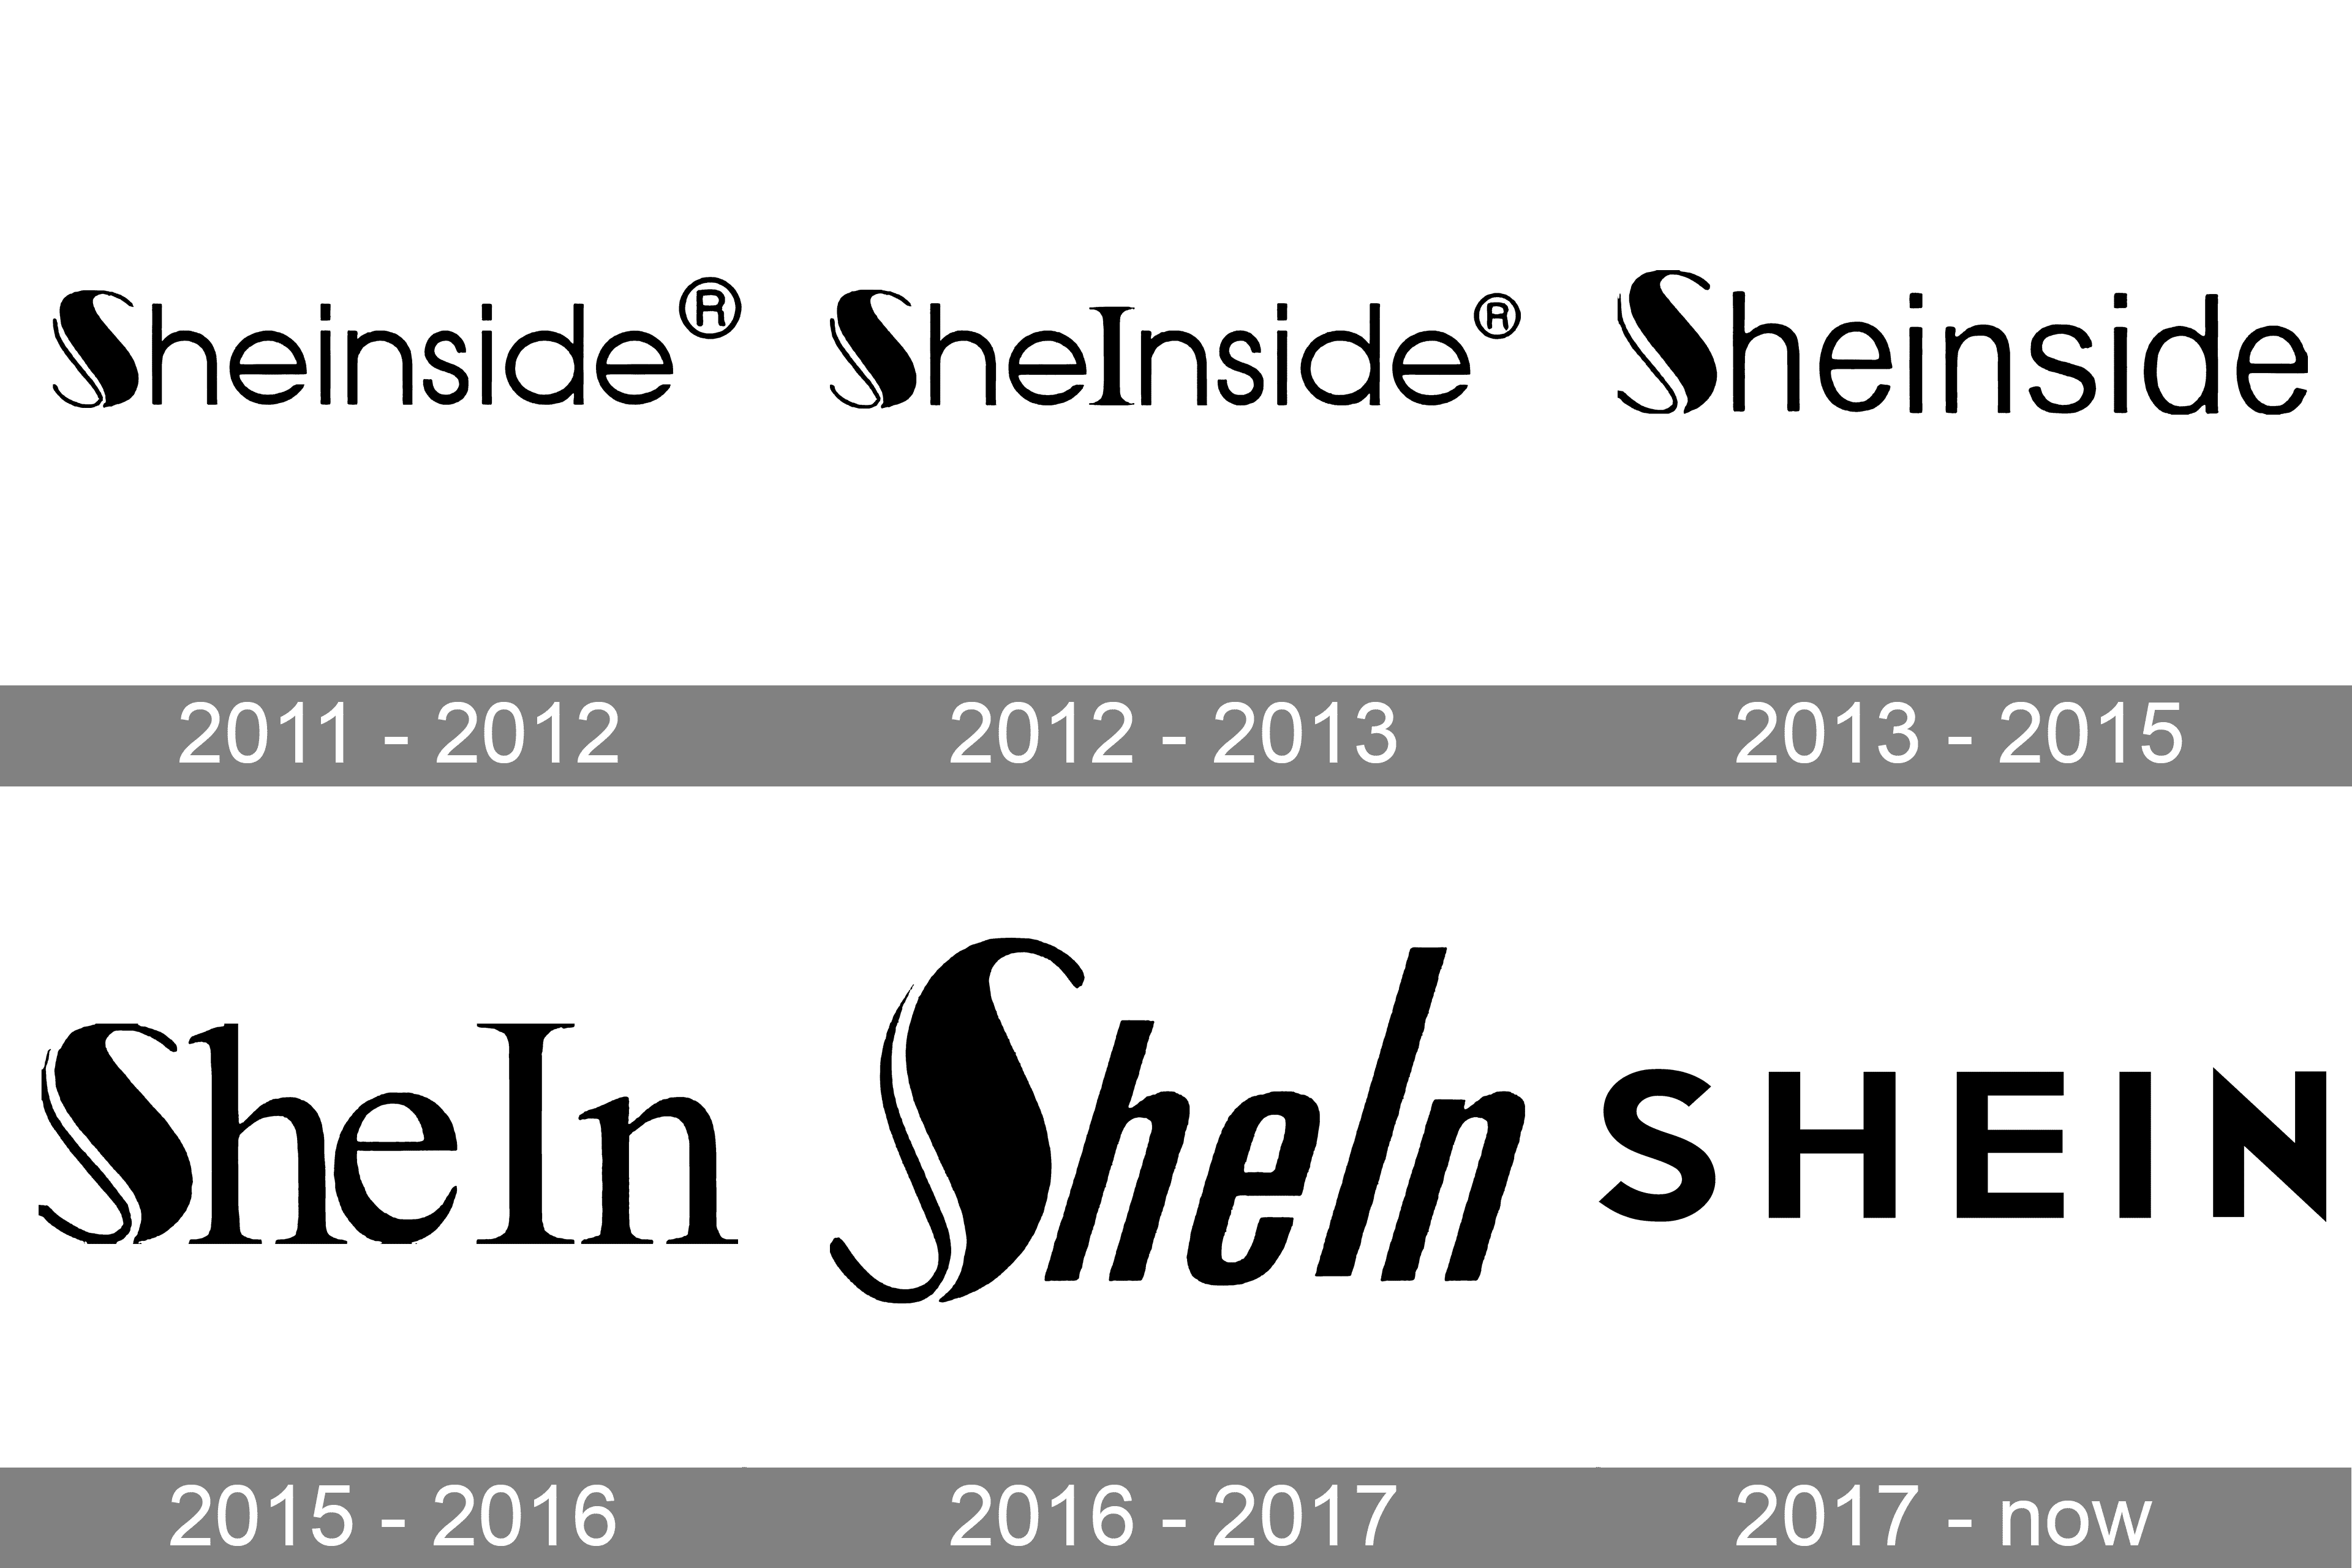 Shopee Logo and symbol, meaning, history, PNG